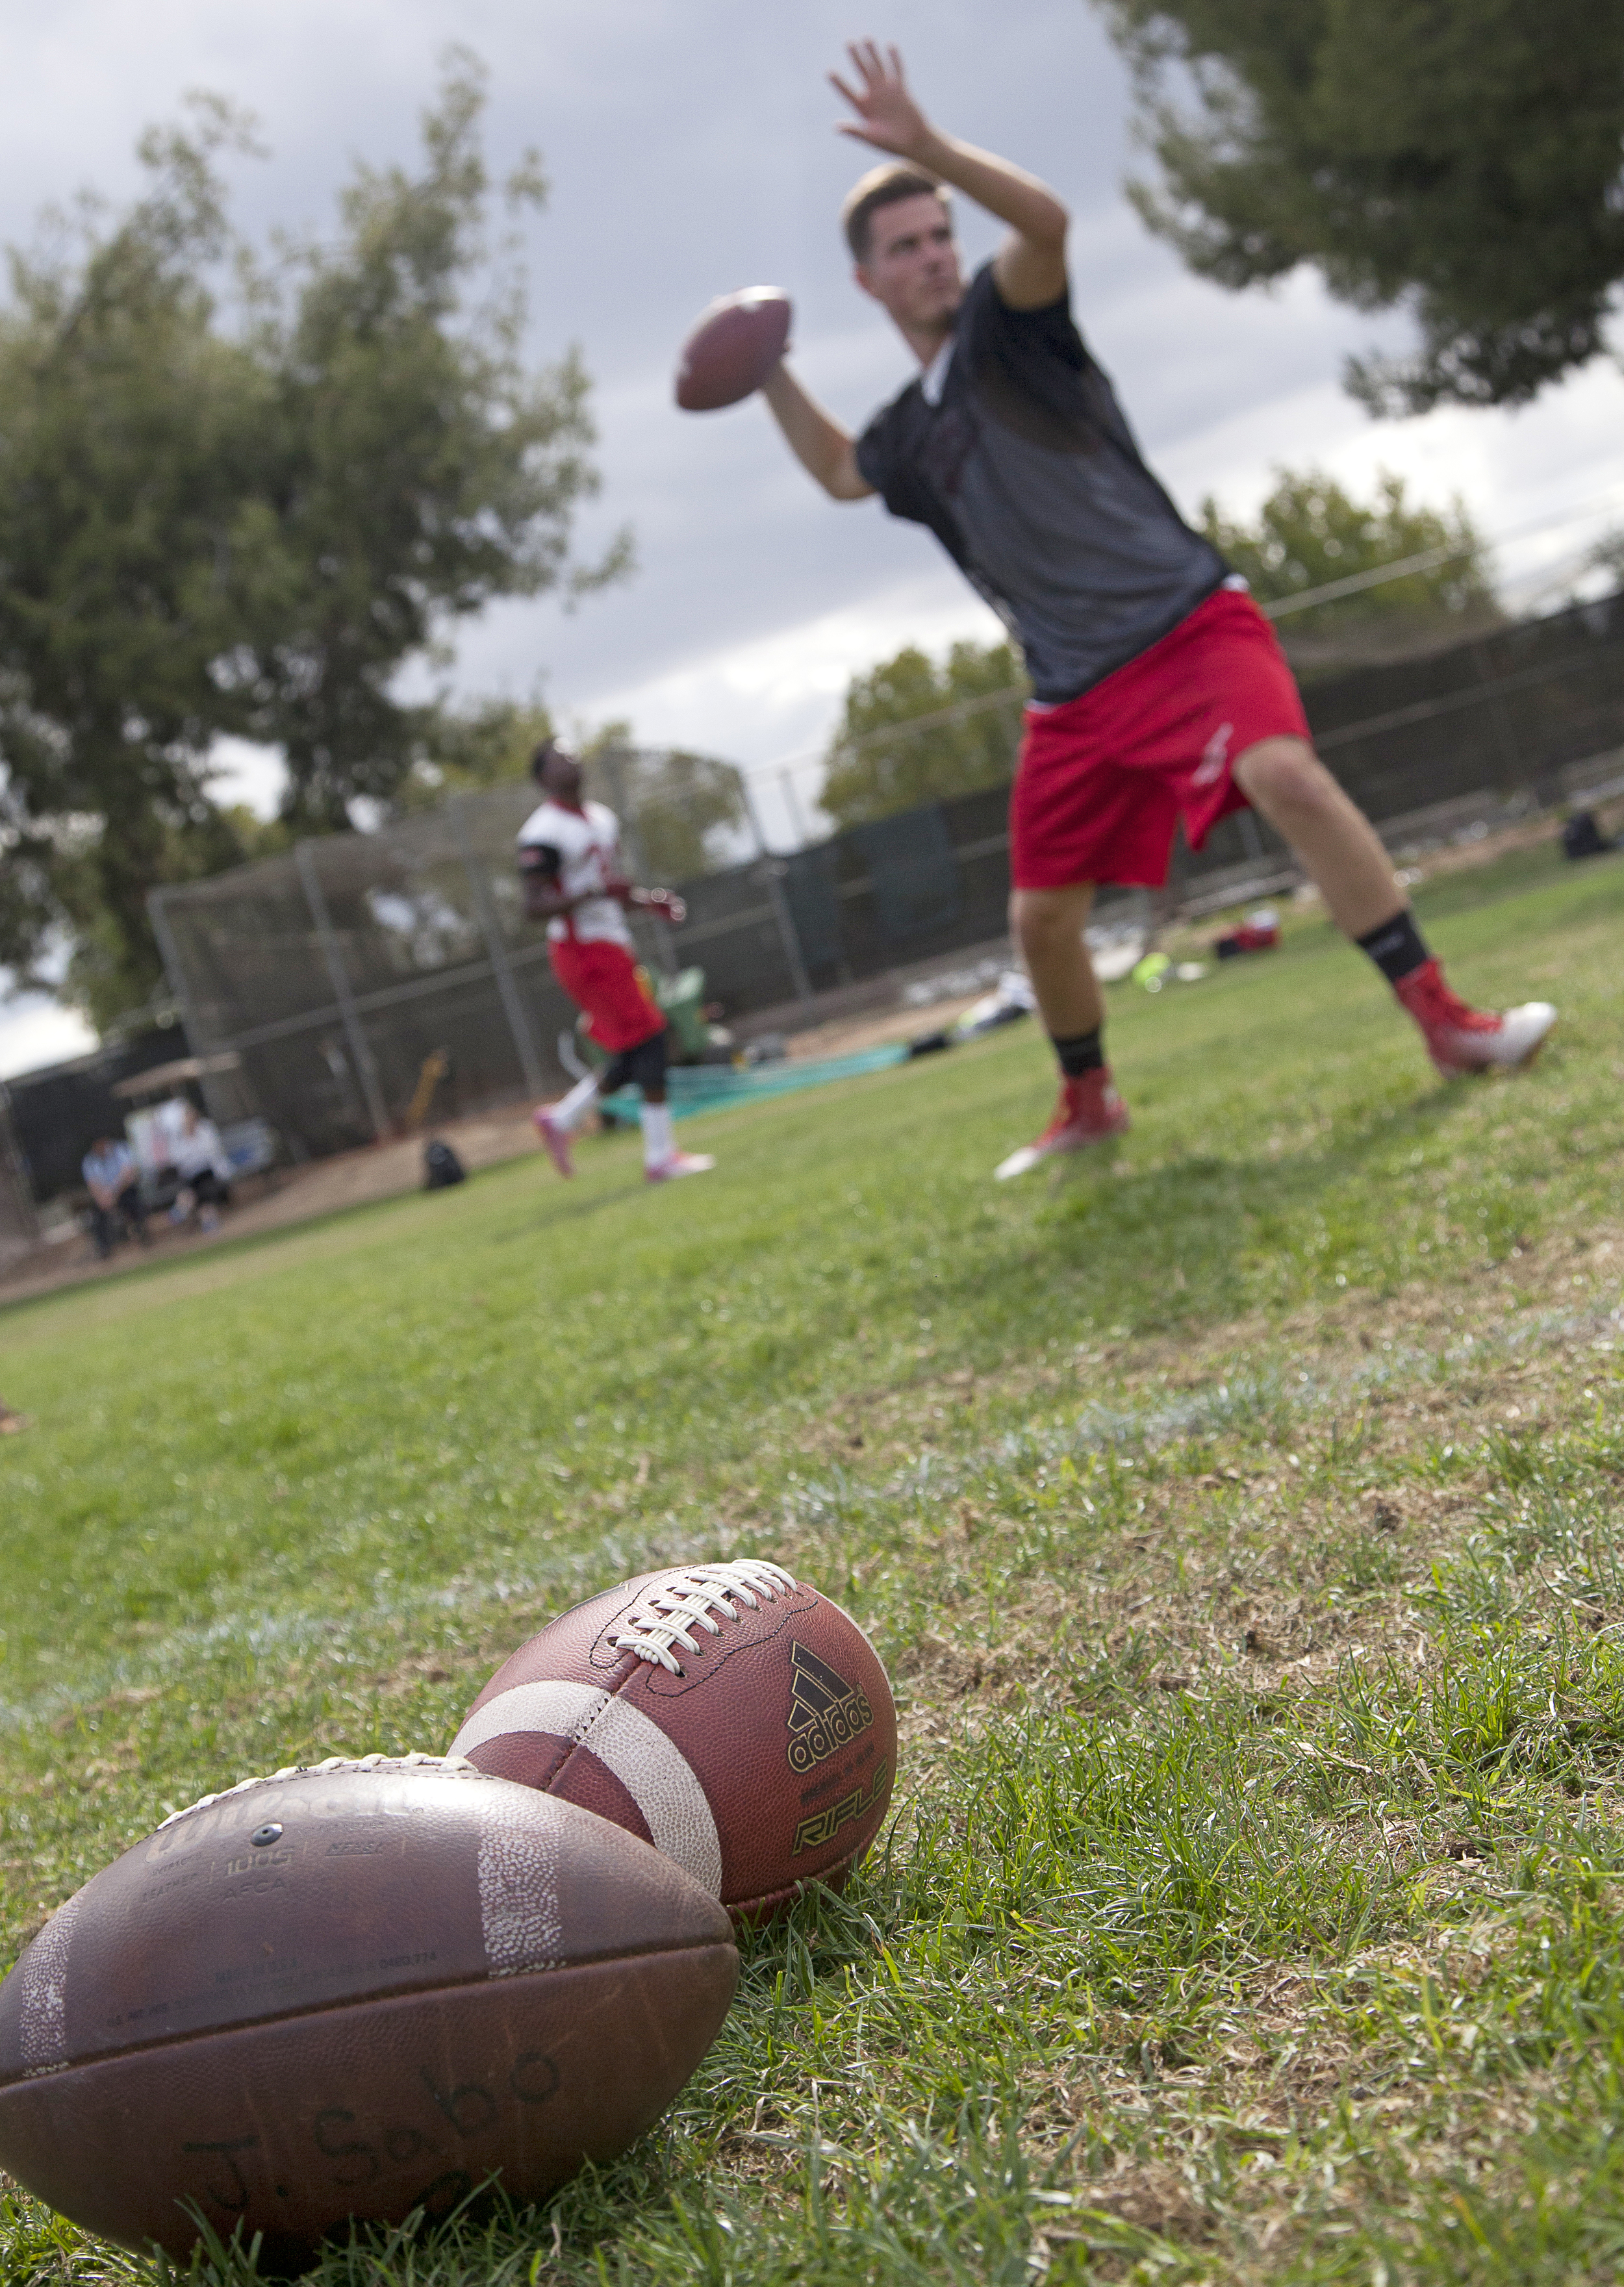  Two footballs lay on the field as quarterback Sean Smith performs throwing drills during a spring practice and training session on Thursday, May 21, 2015. Woodland Hills, Calif.&nbsp; 